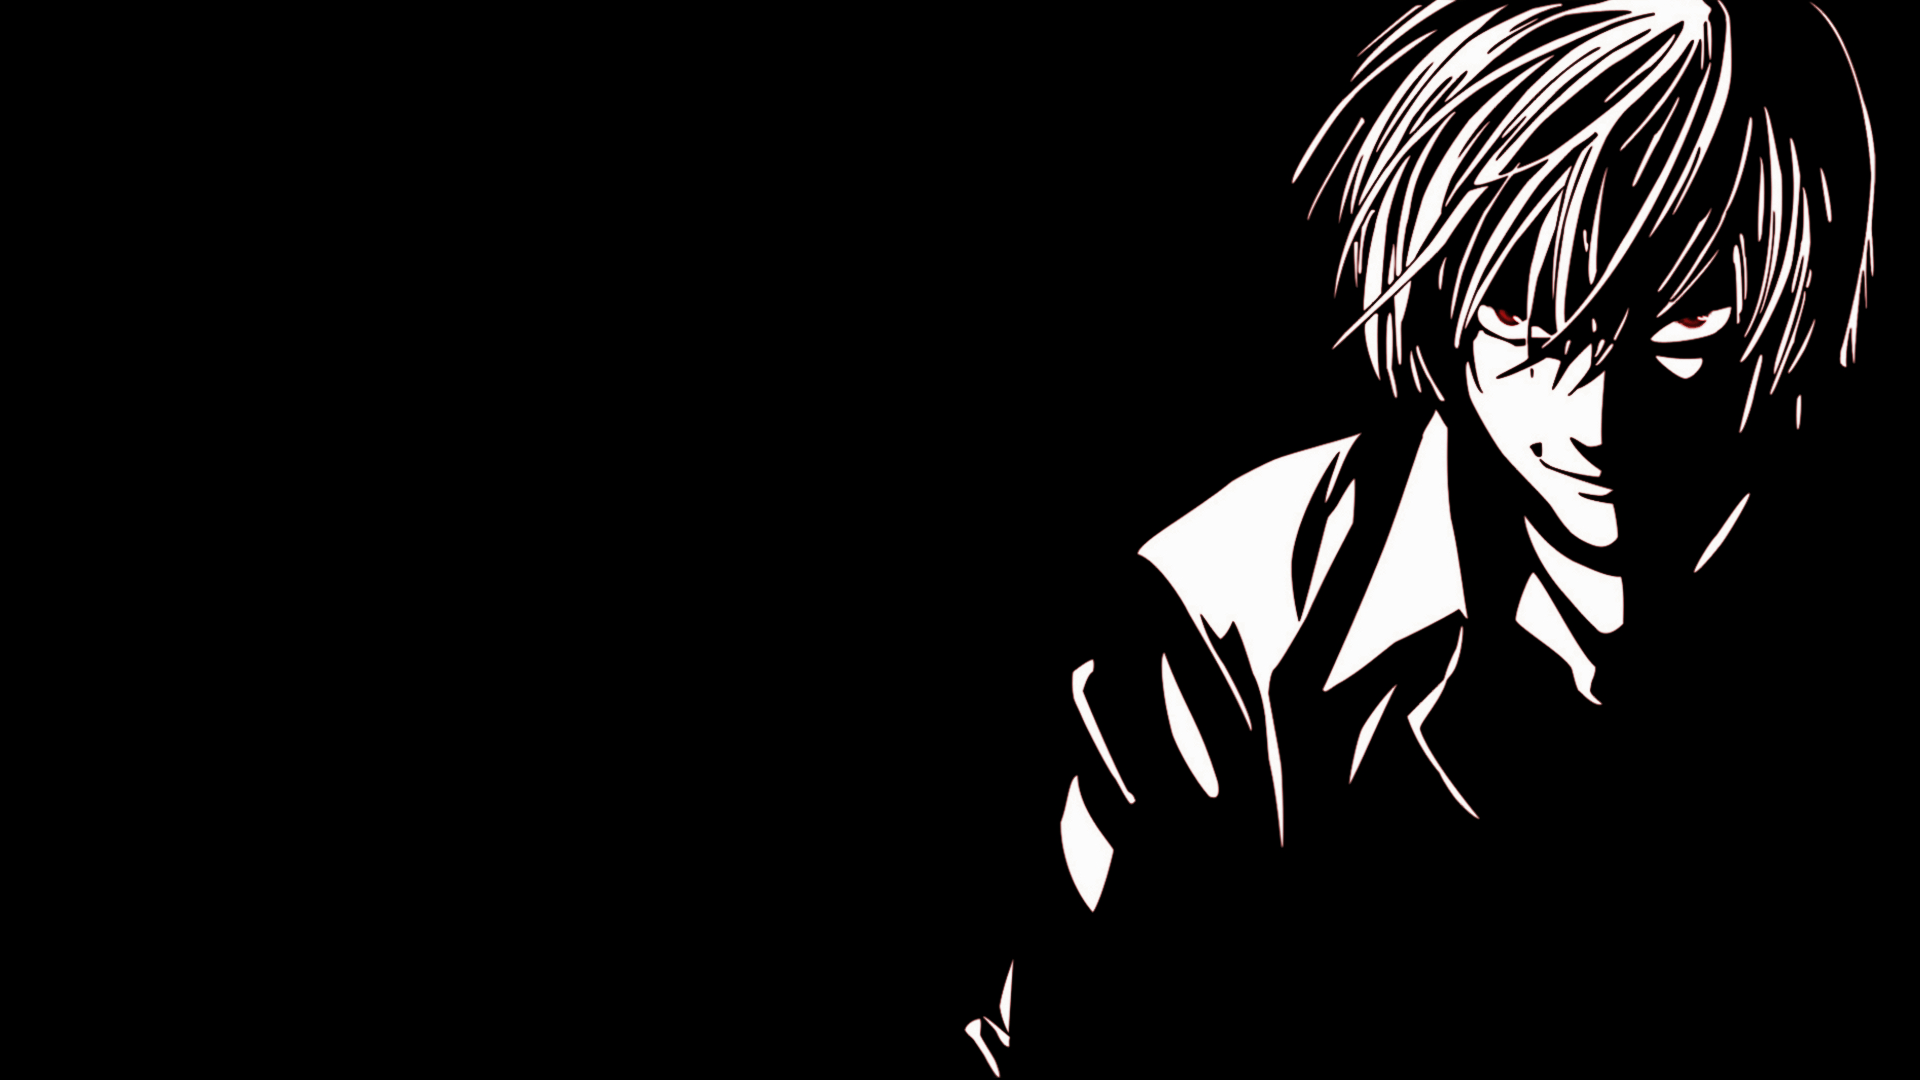 Anime Ps4 Death Note Wallpapers Wallpaper Cave We have a massive amount of hd images that will make your computer or smartphone look absolutely fresh. anime ps4 death note wallpapers